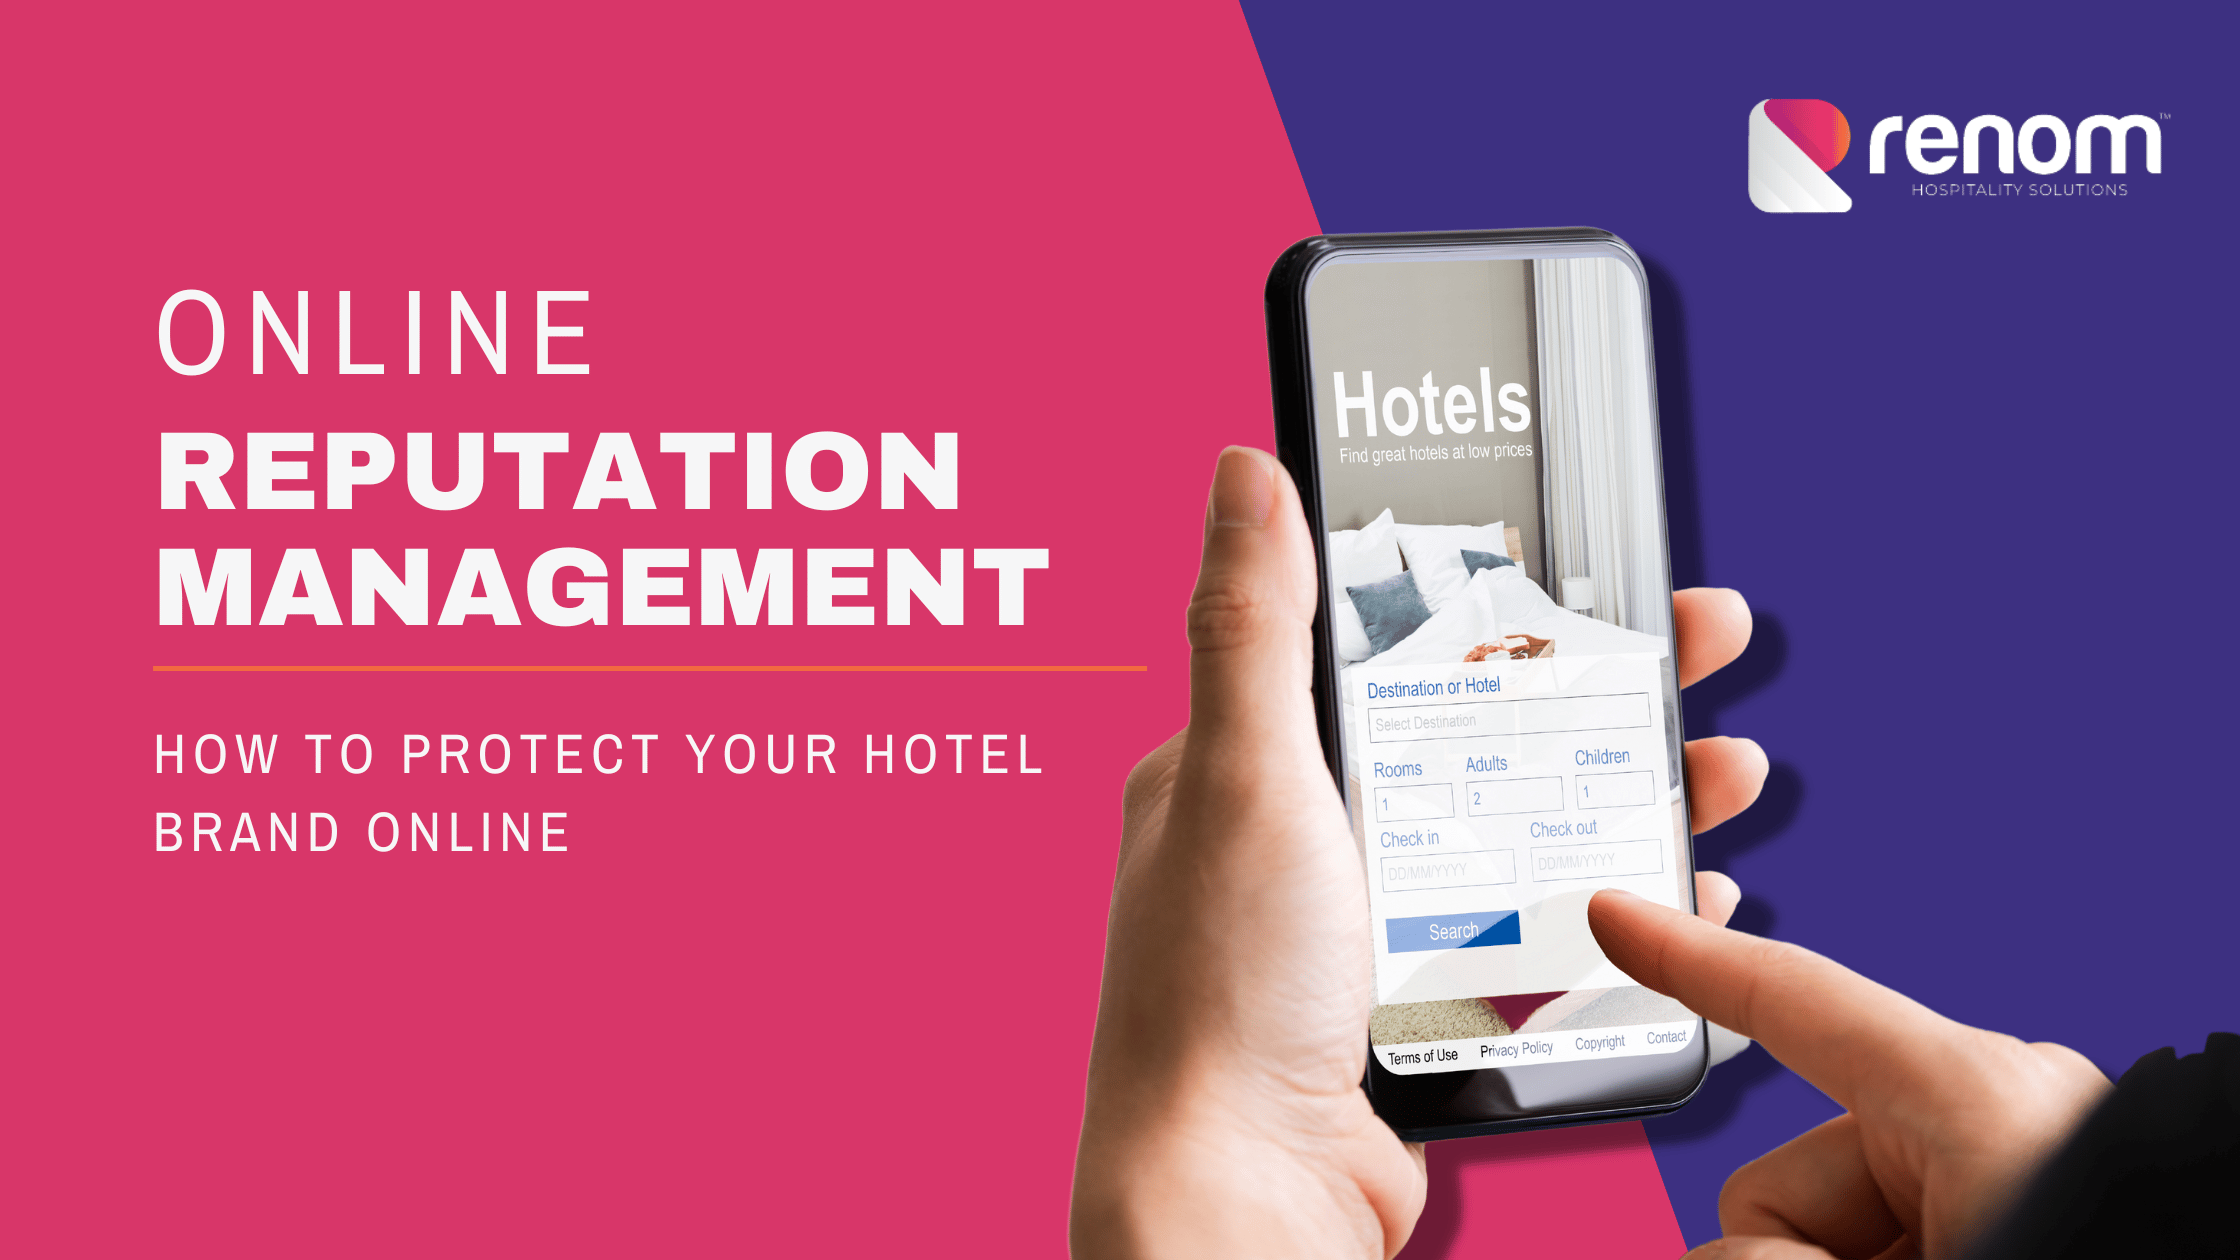 Reputation Management How to Protect Your Hotel Brand Online